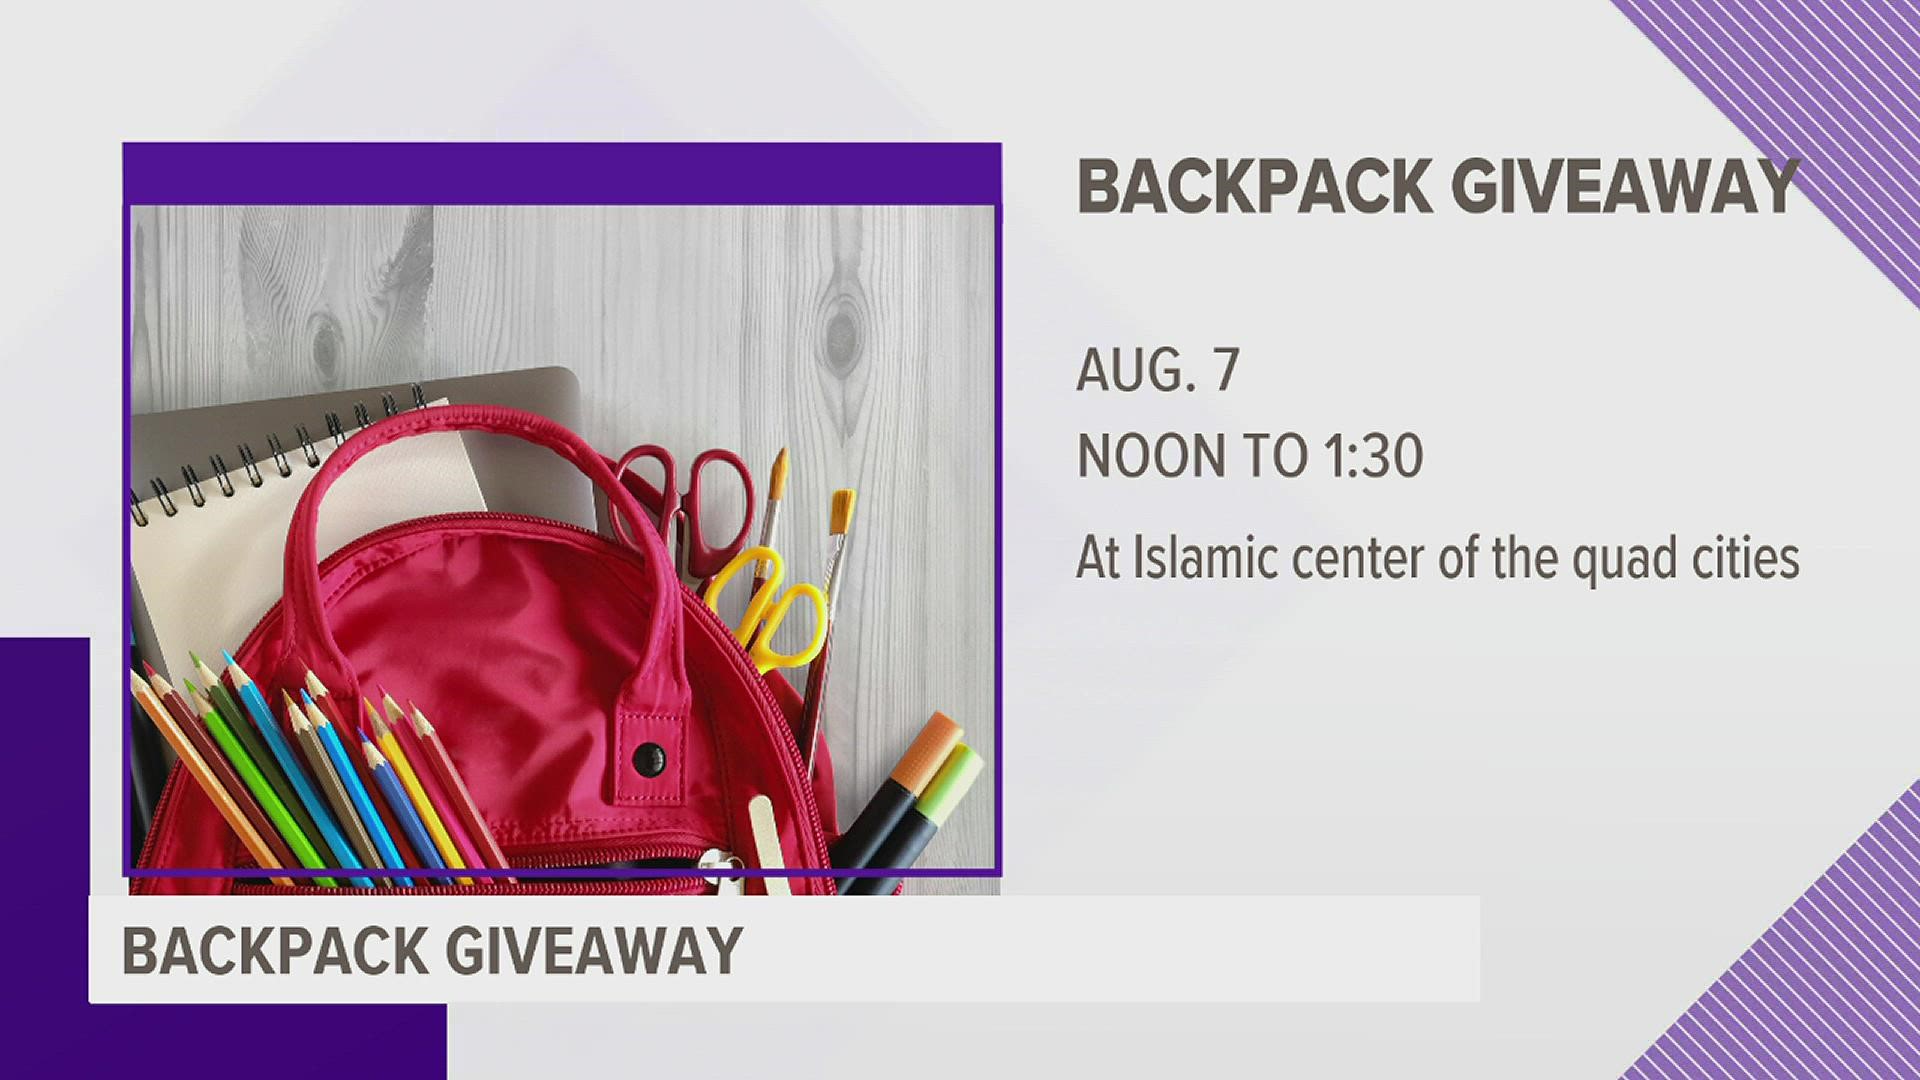 The ICQA will be giving out backpacks to families in need on Sunday, Aug. 7 from noon to 1:30 p.m. in Moline.